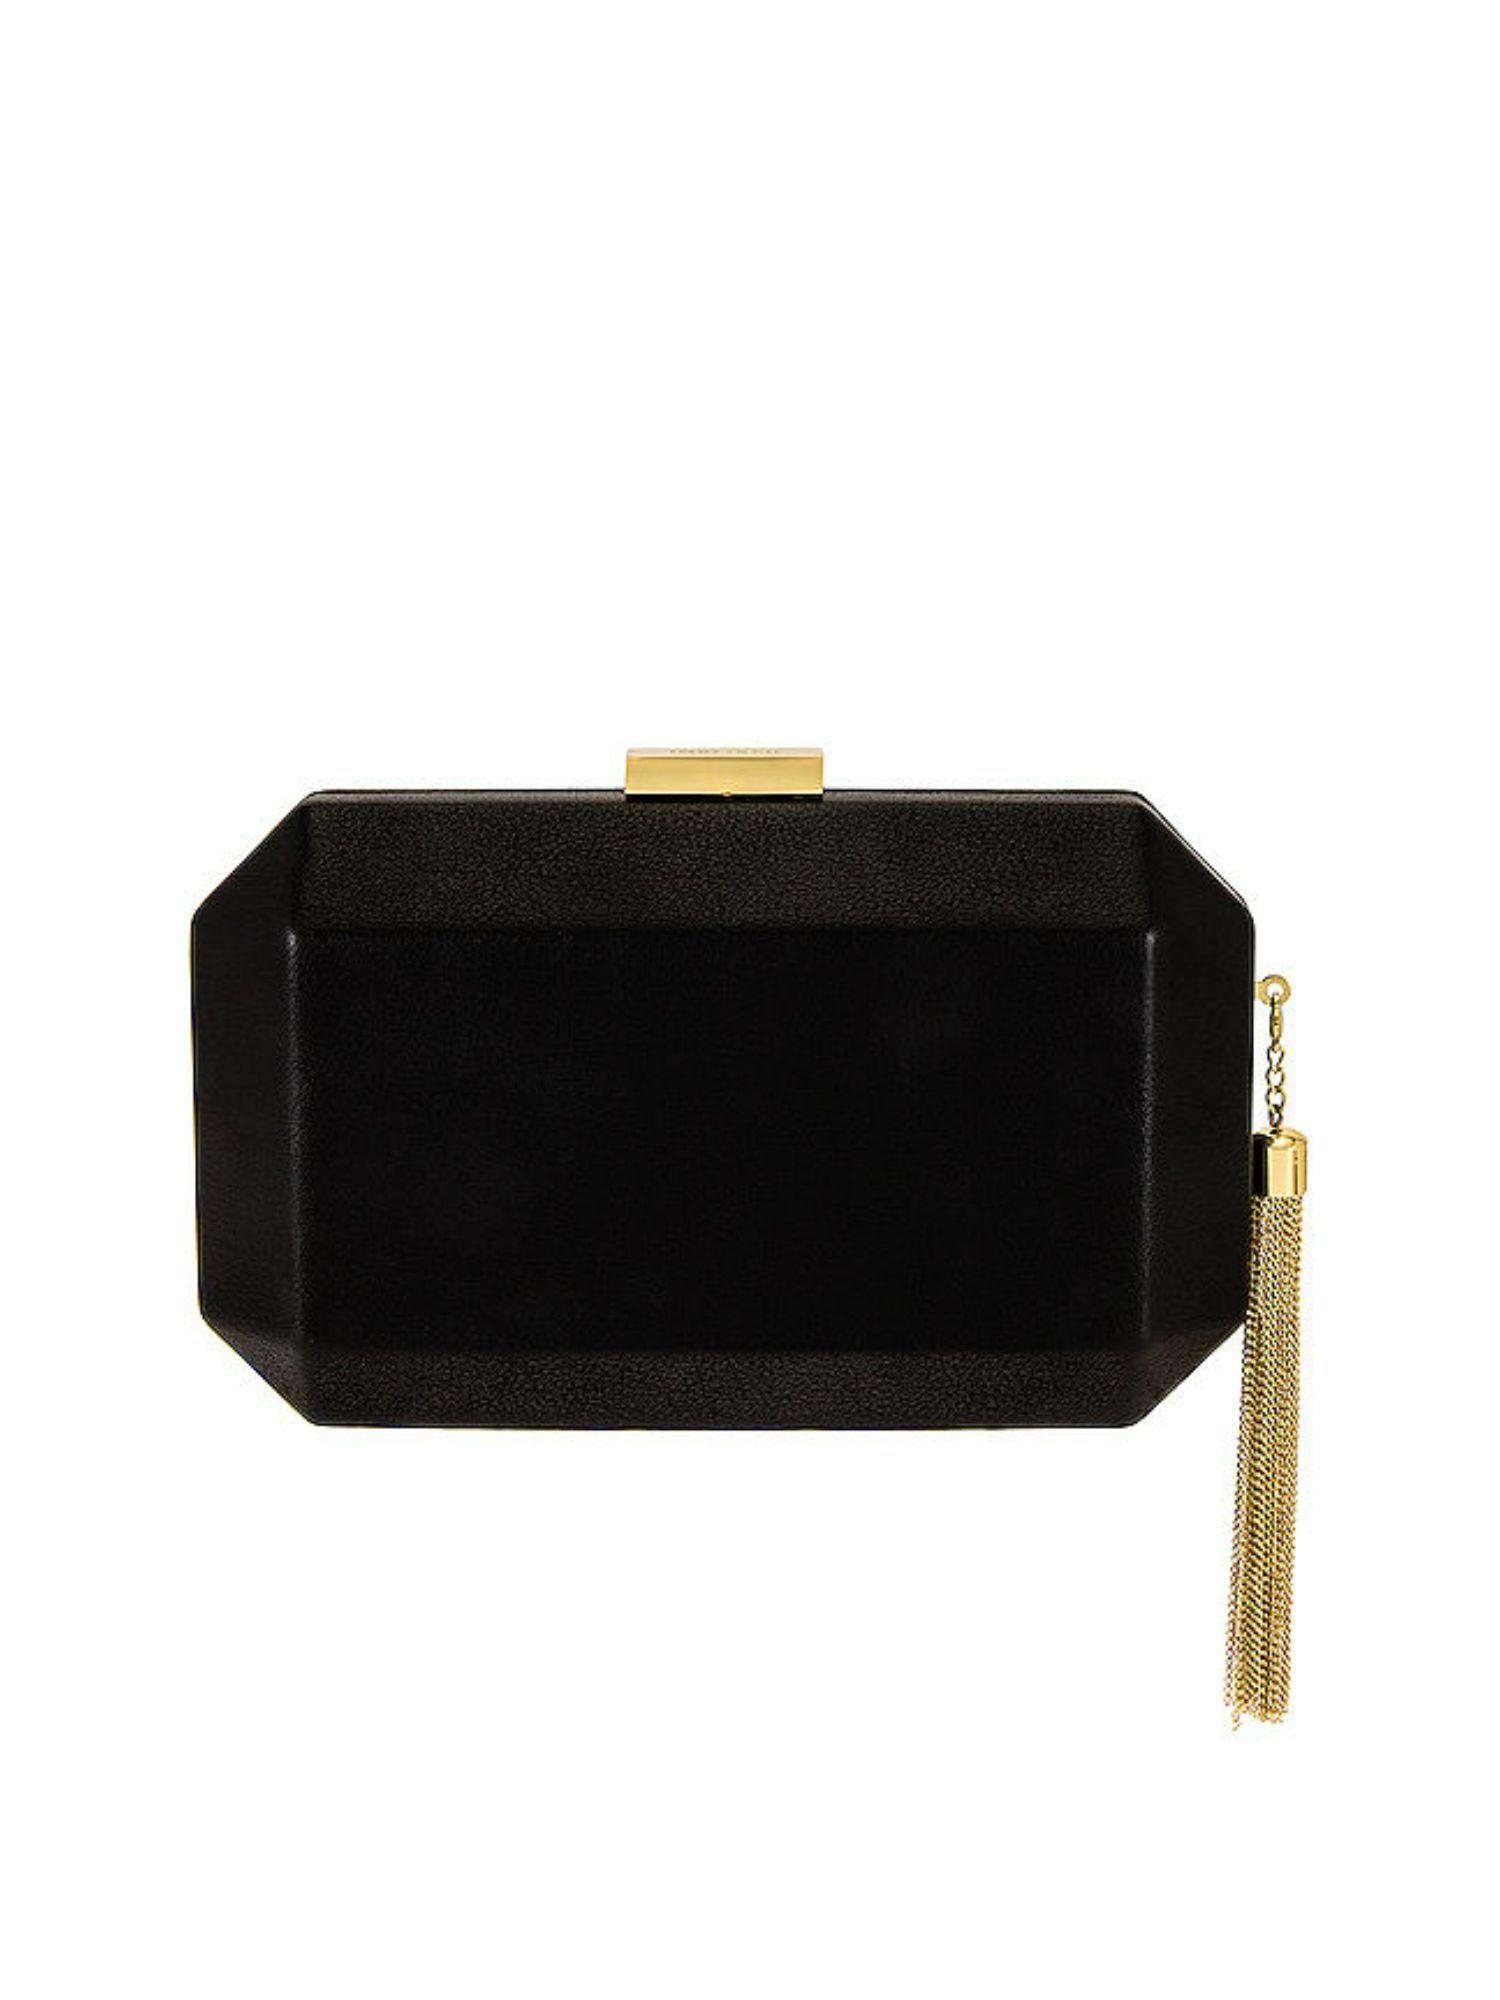 lia facetted clutch with tassel